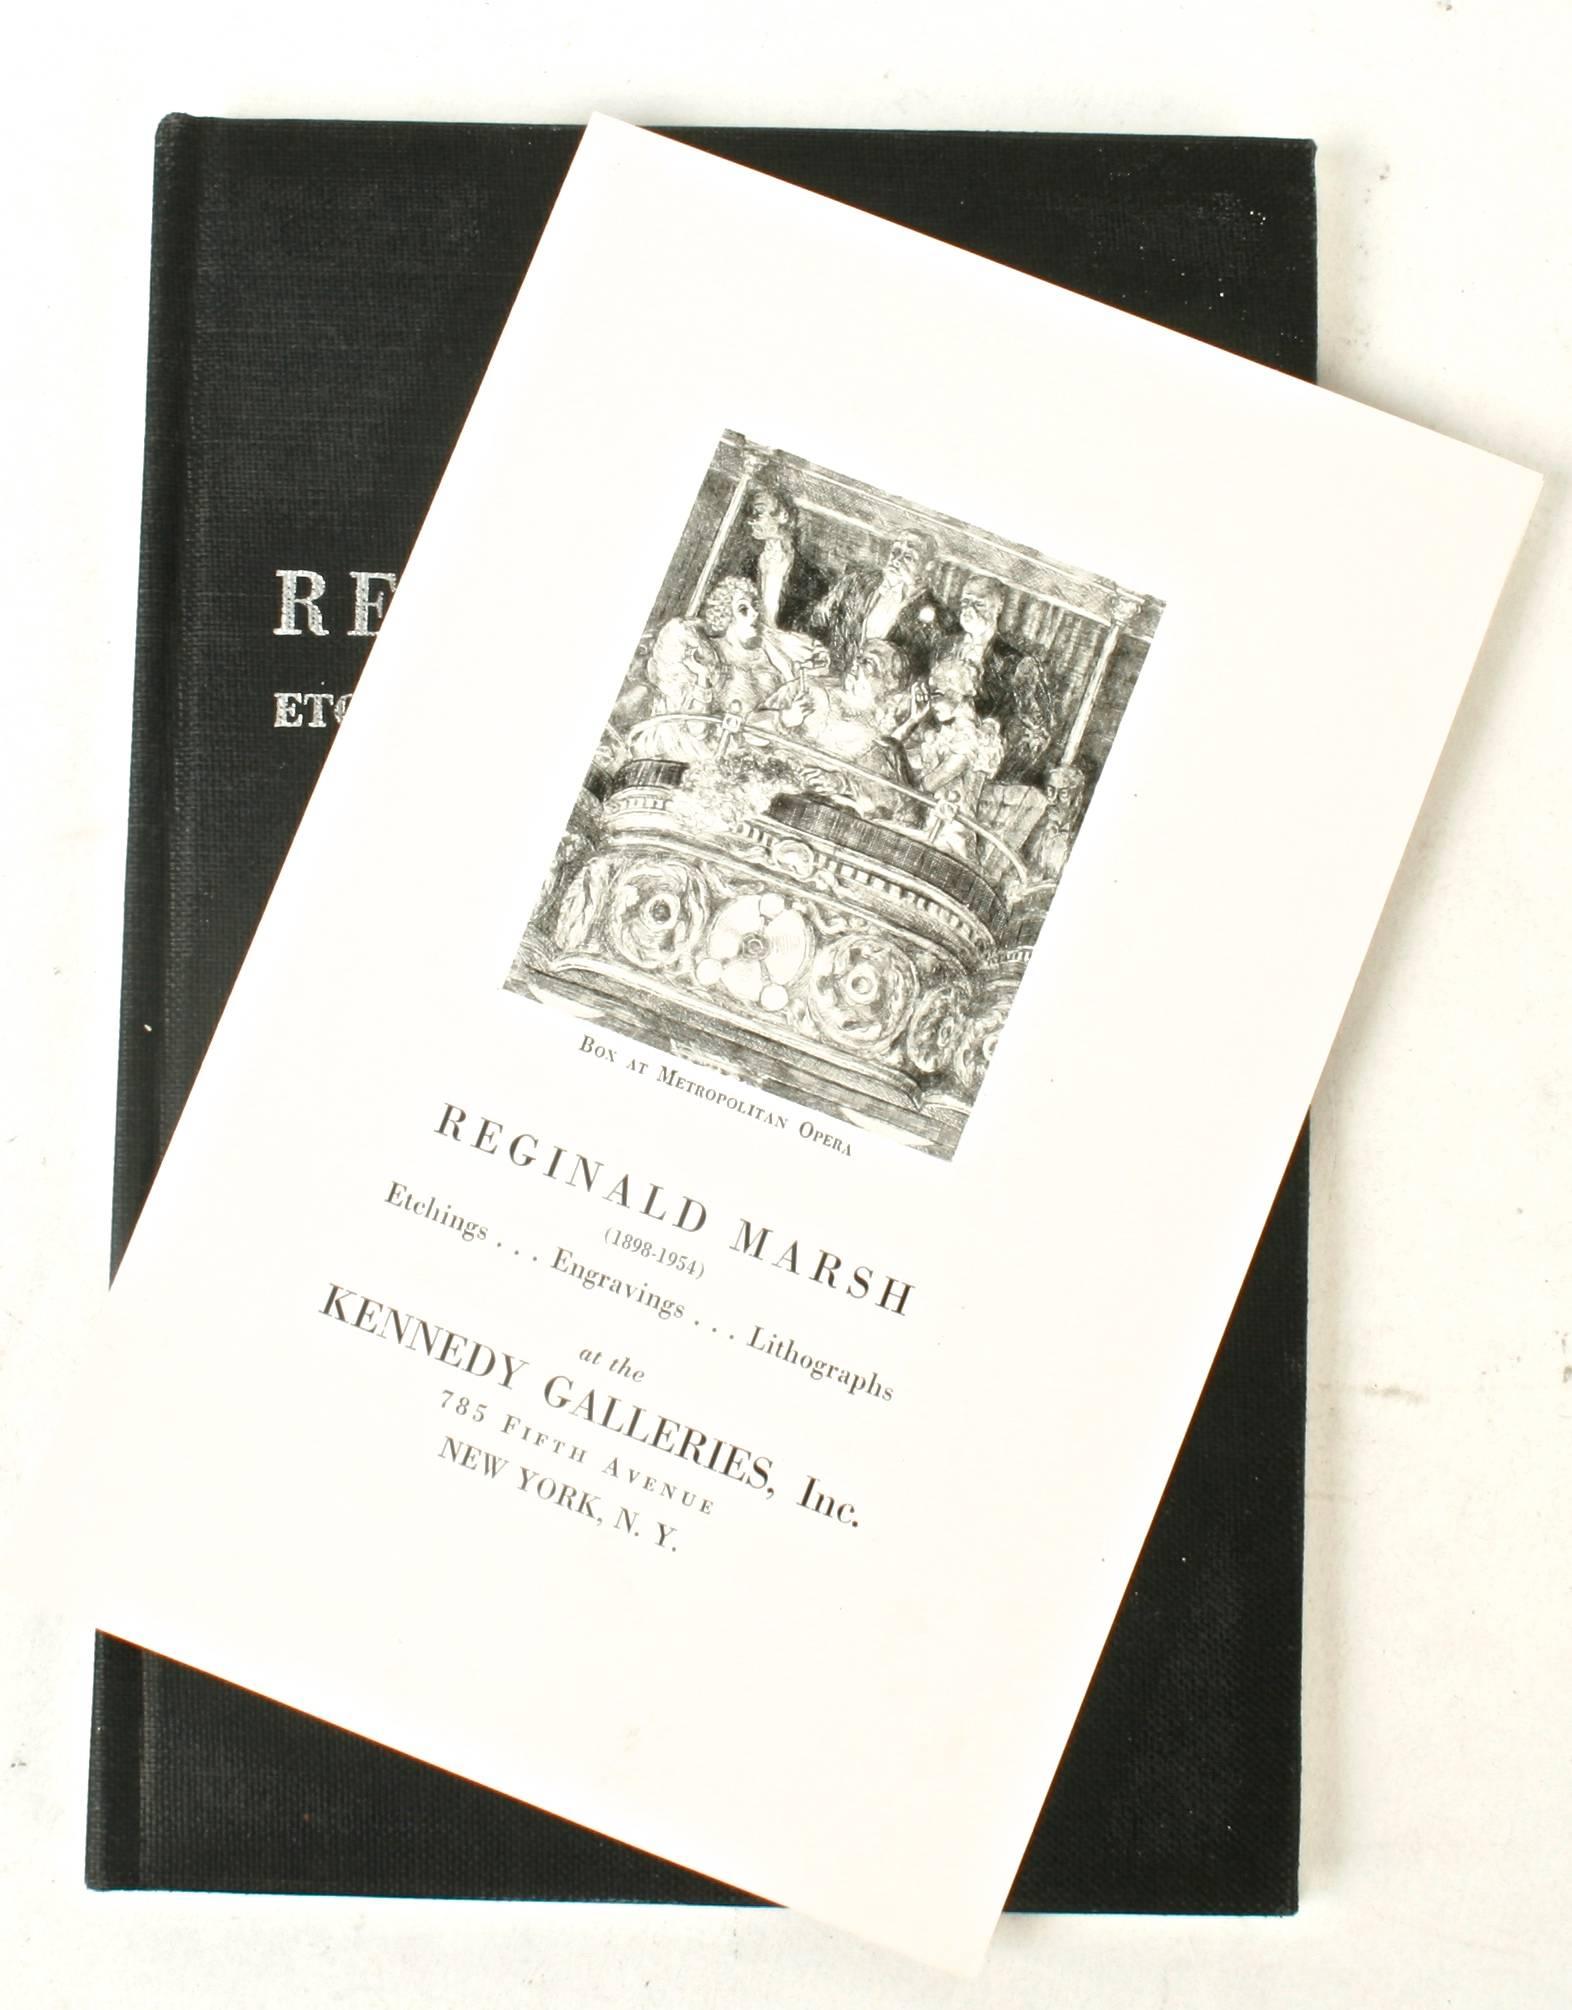 Reginald Marsh, Etchings, Engravings, Lithographs, First Edition For Sale 3